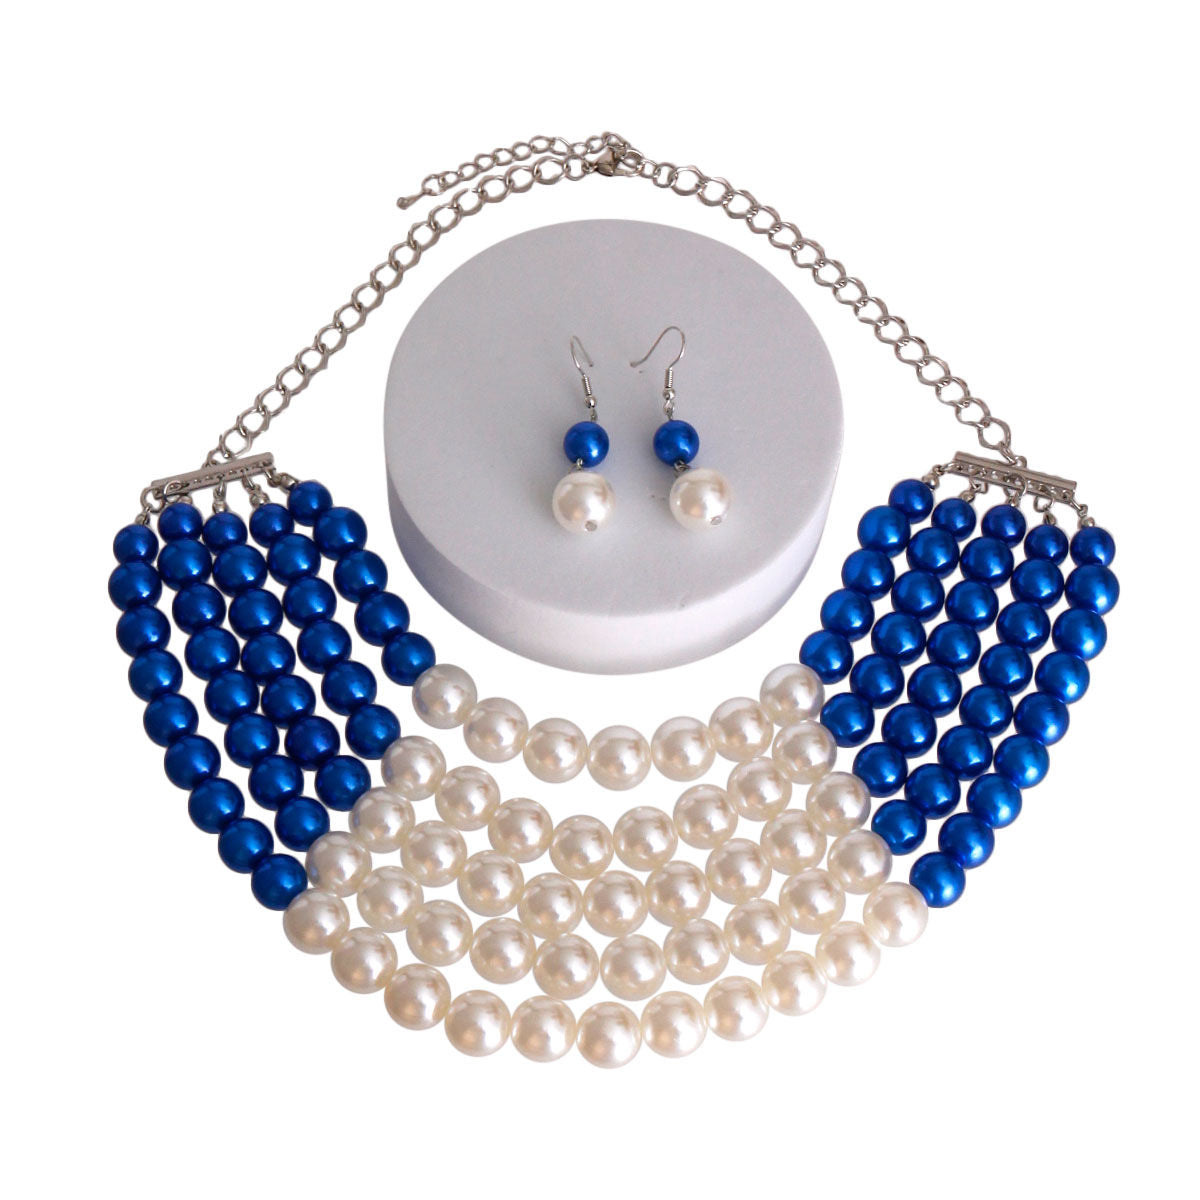 Blue and Cream Pearl 5 Row Necklace